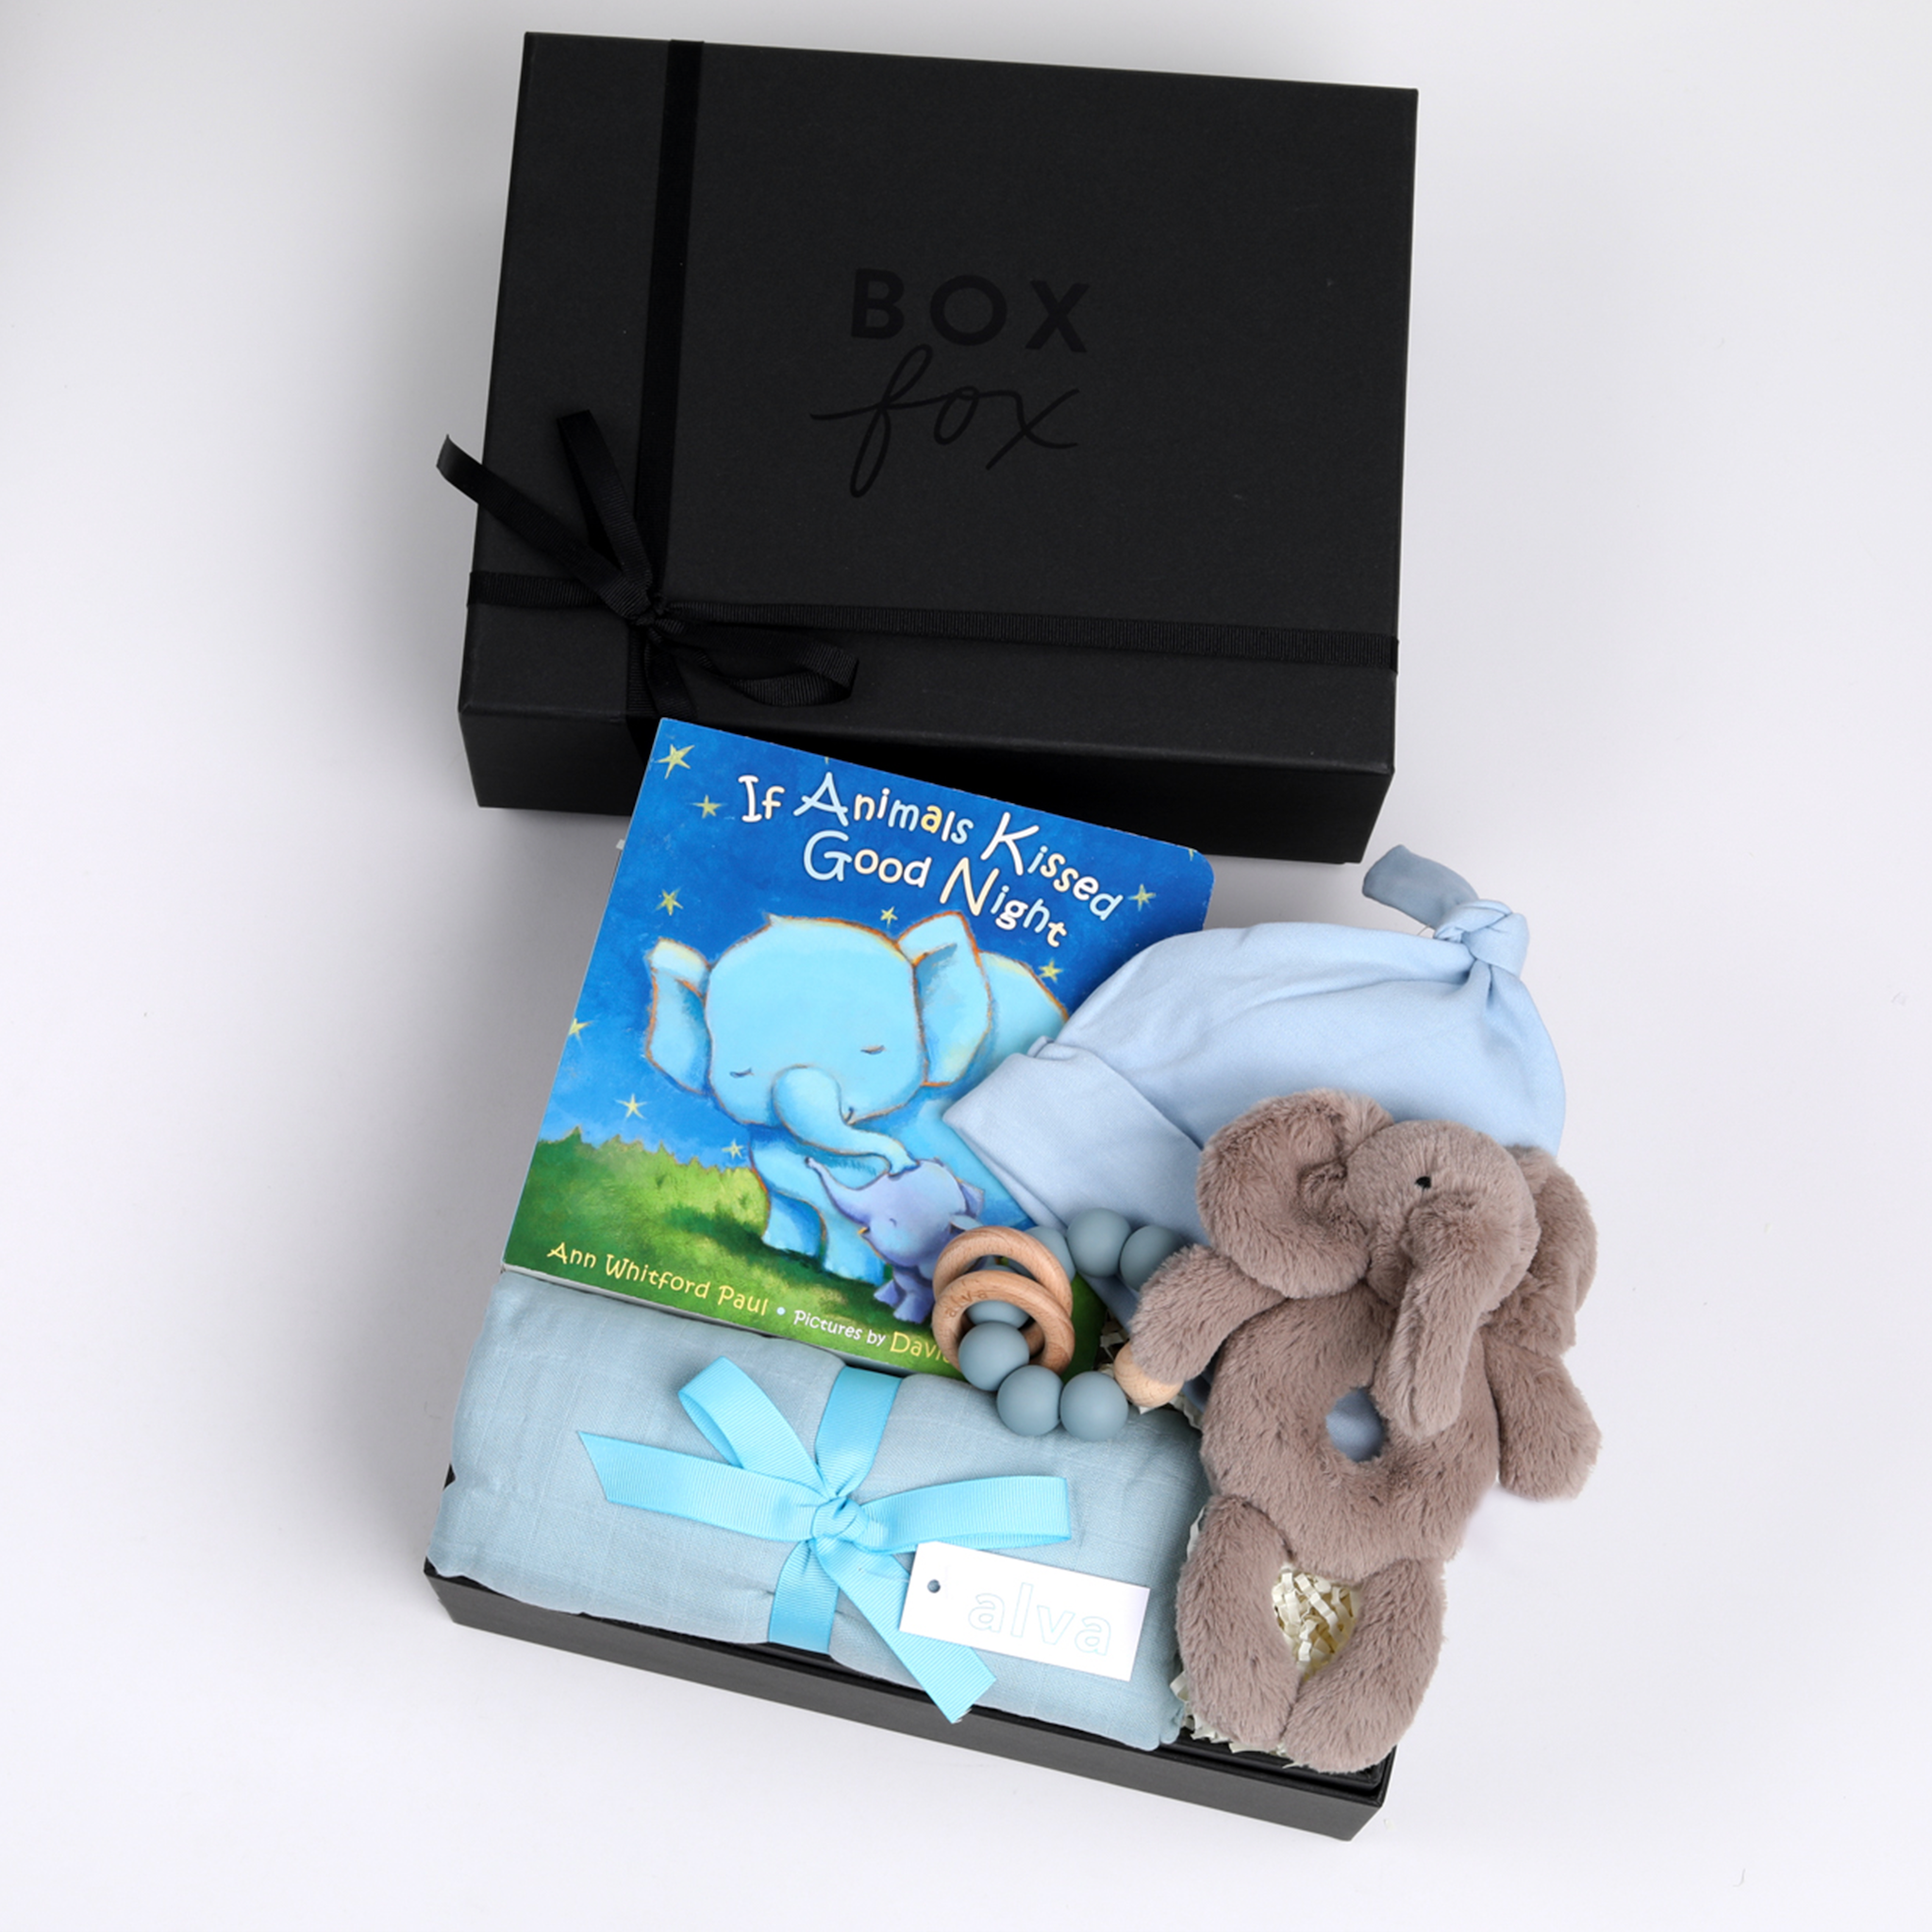 BOXFOX New Baby Boy Box in black, including a swaddle, elephant rattle, teether, hat and book.